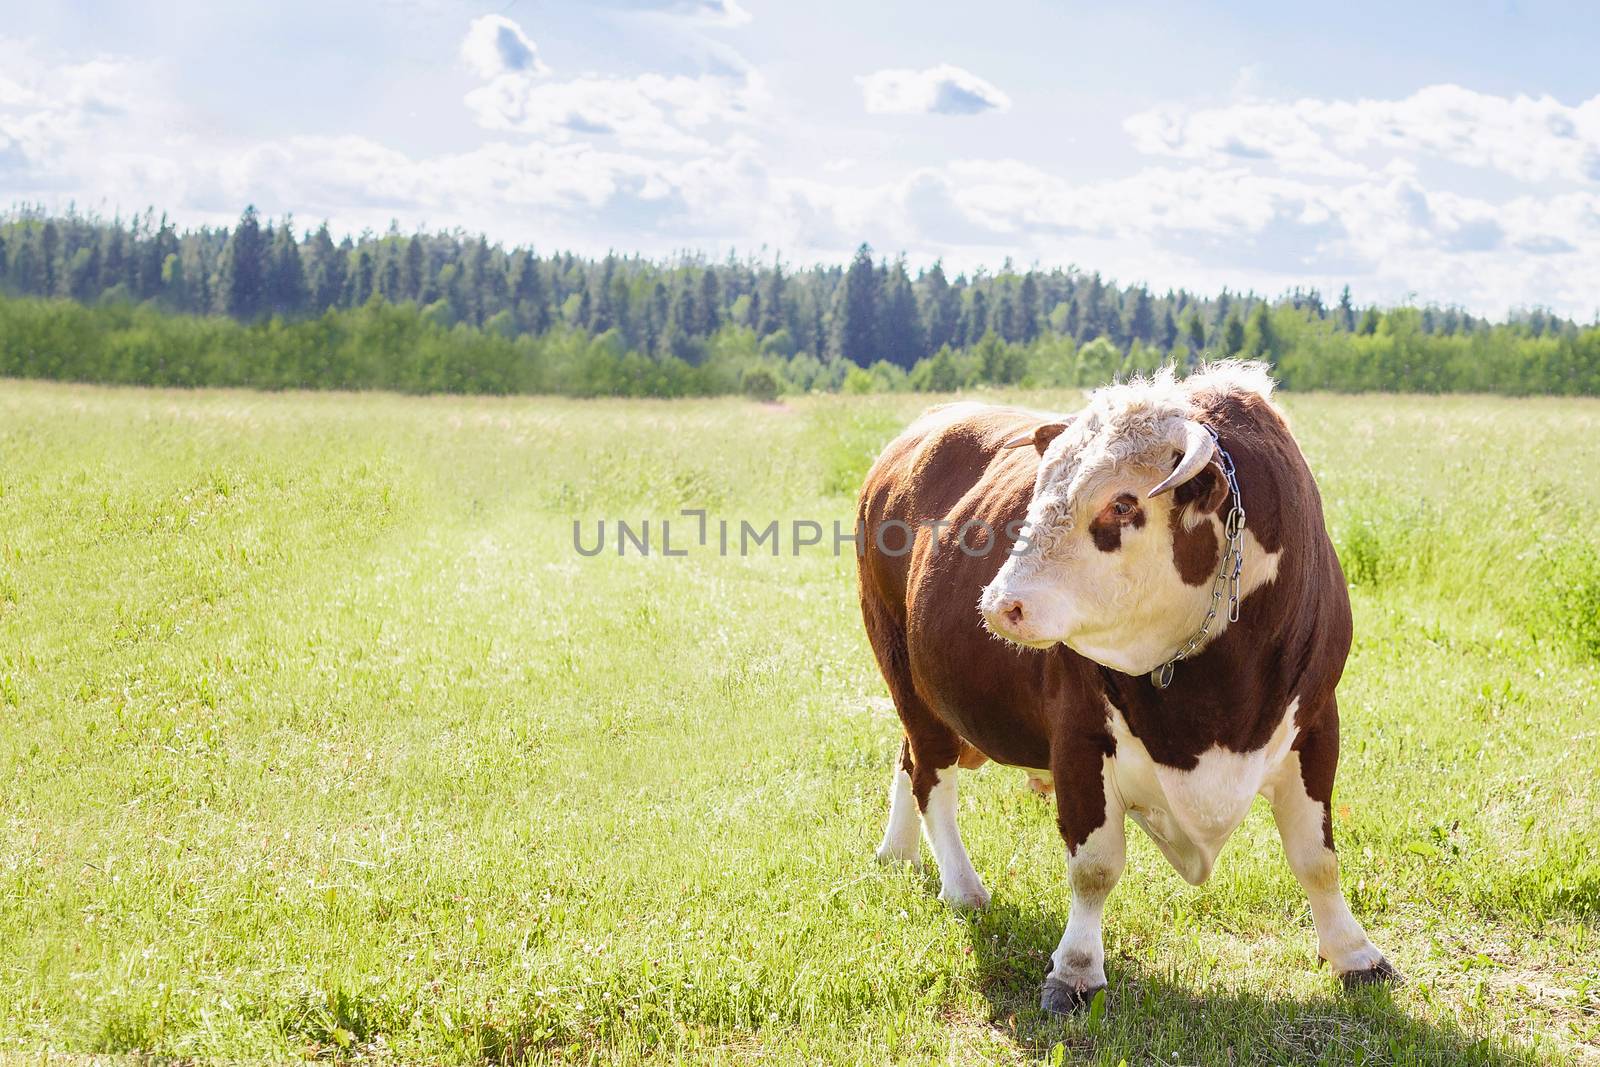 A bull, a big bull with a ring in its nose, stood majestically in a lush summer meadow by a wooden fence, a milk bull was grazing in a green meadow. Landscape, horizontal. Place to copy